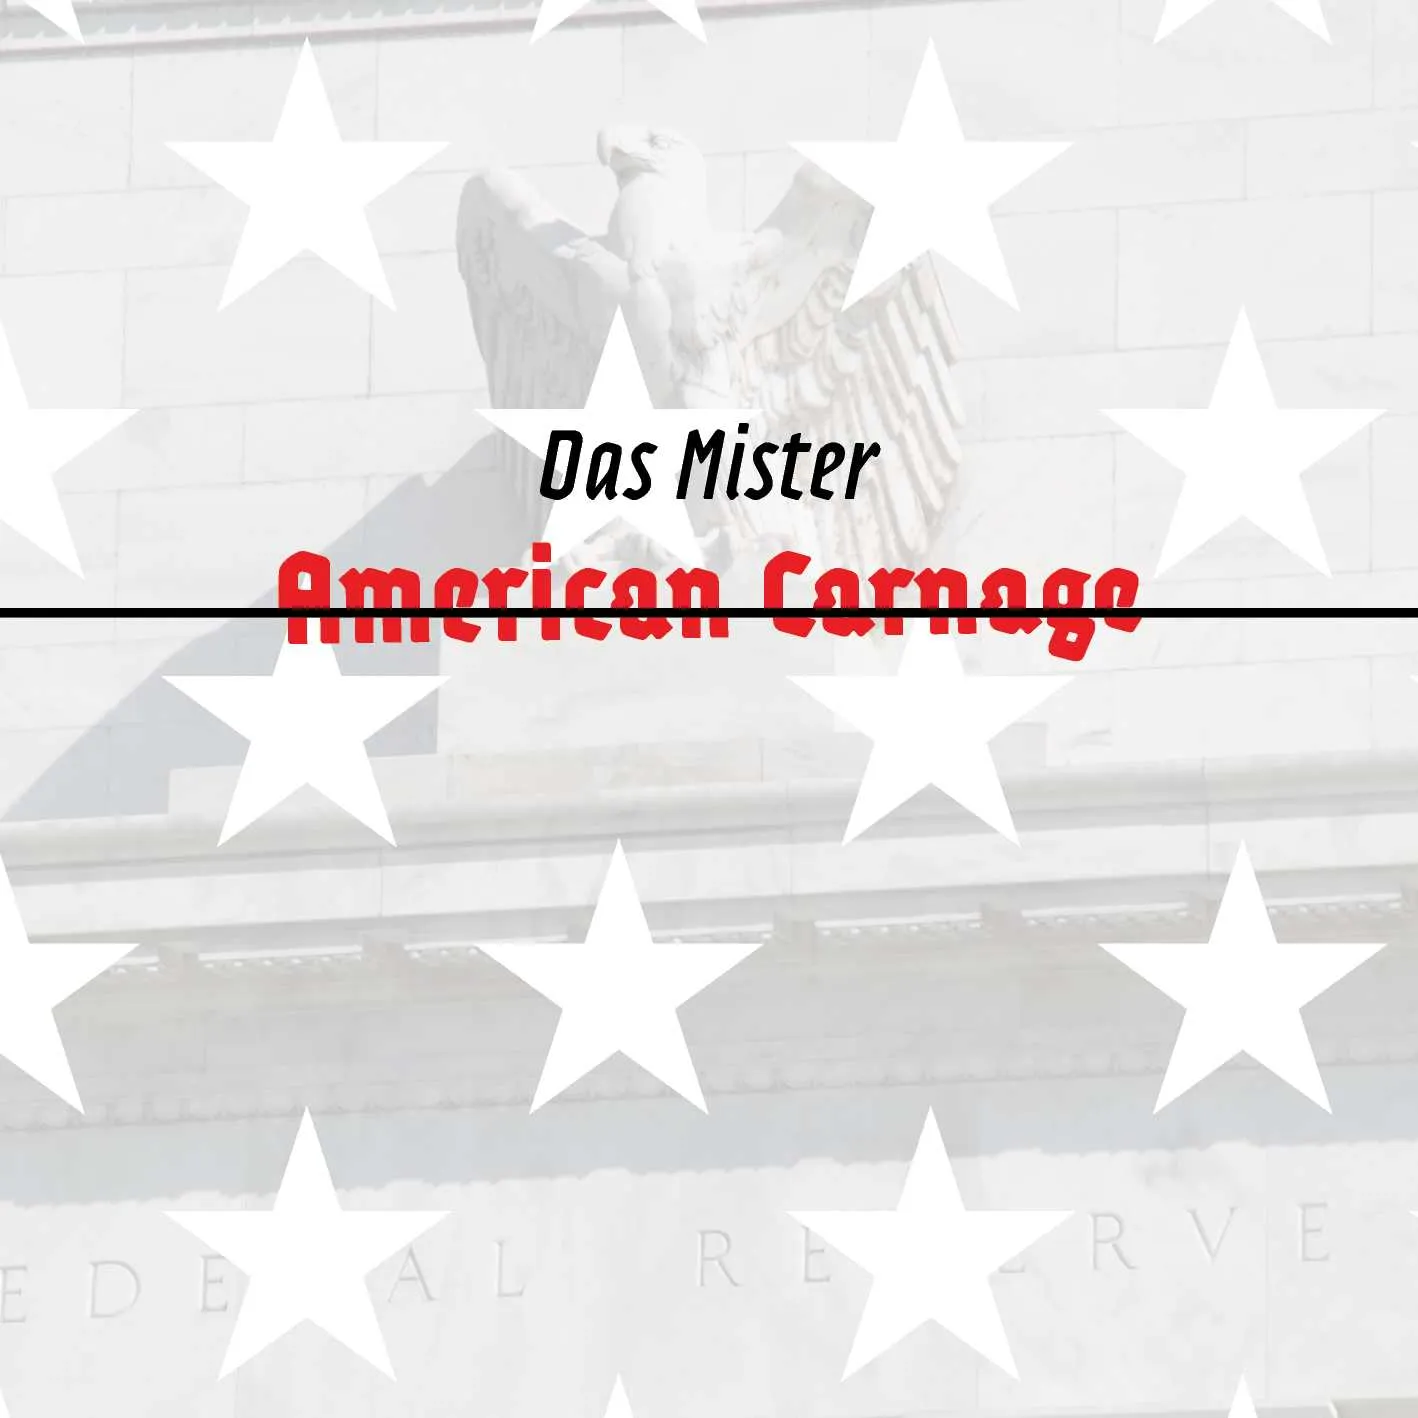 Cover of “American Carnage” by Das Mister